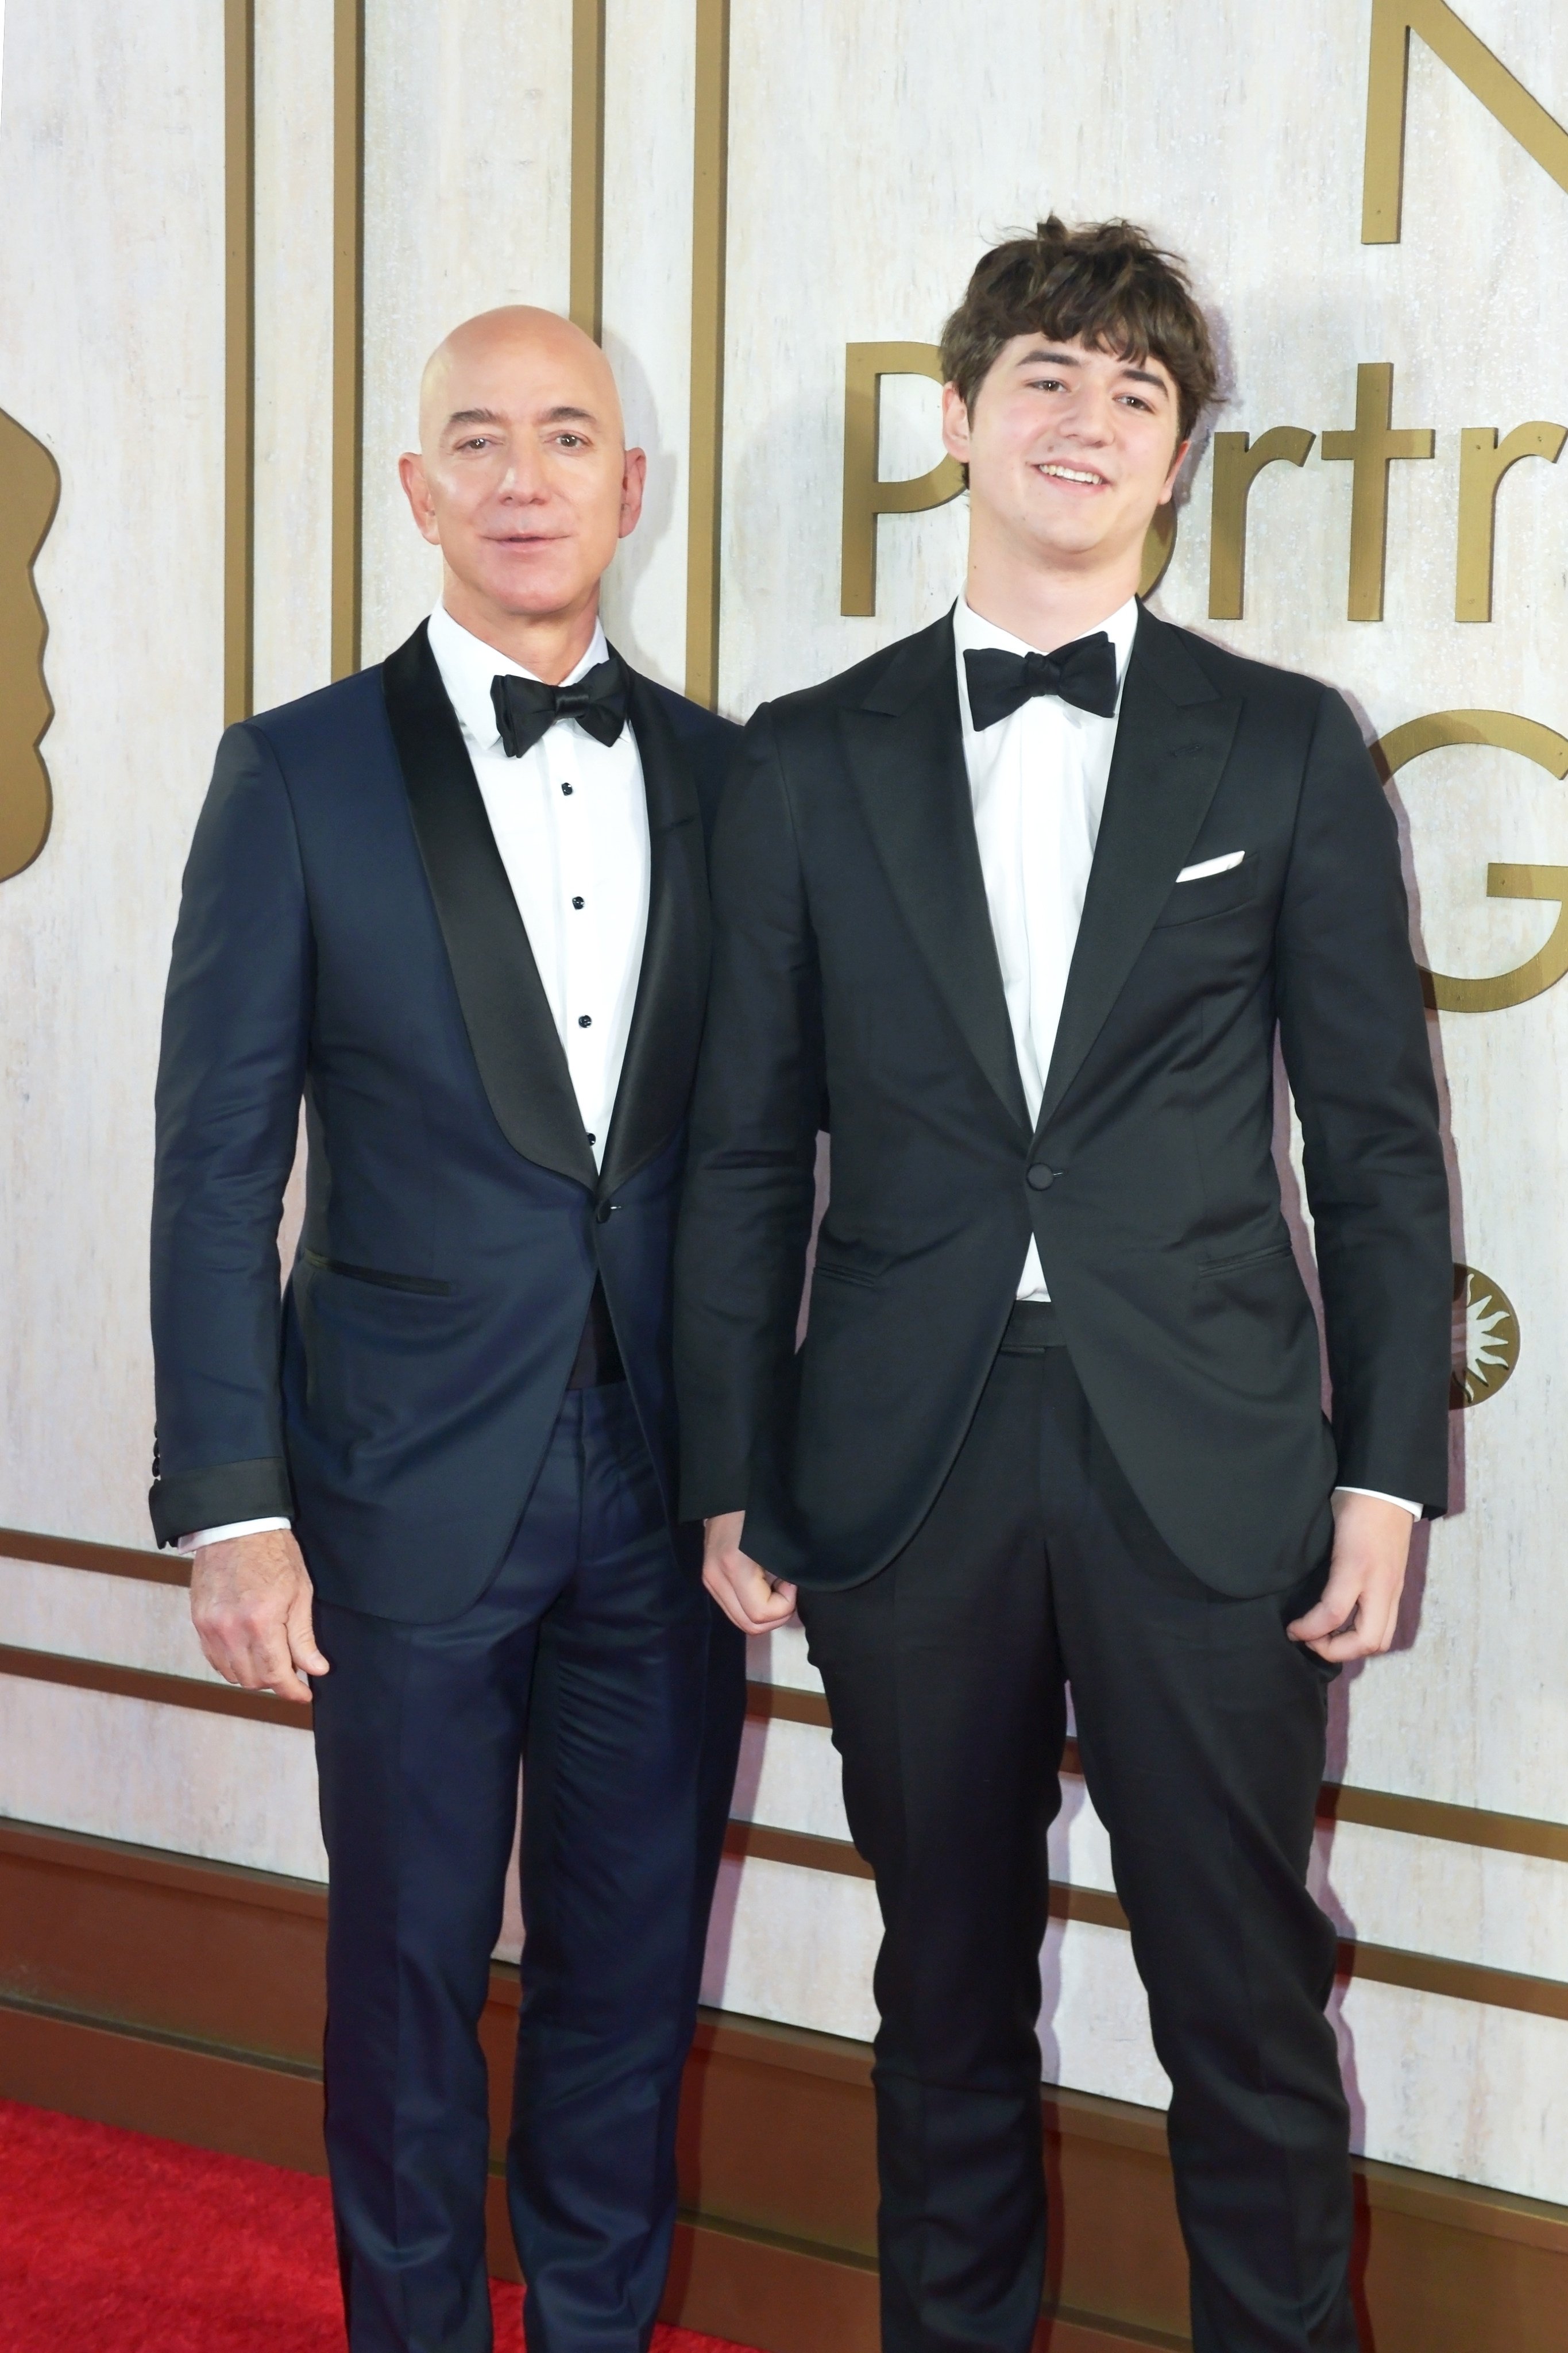 Preston Bezos, right, is billionaire and Amazon founder Jeff Bezos’ eldest child ... so what is he like? Photo: Getty Images